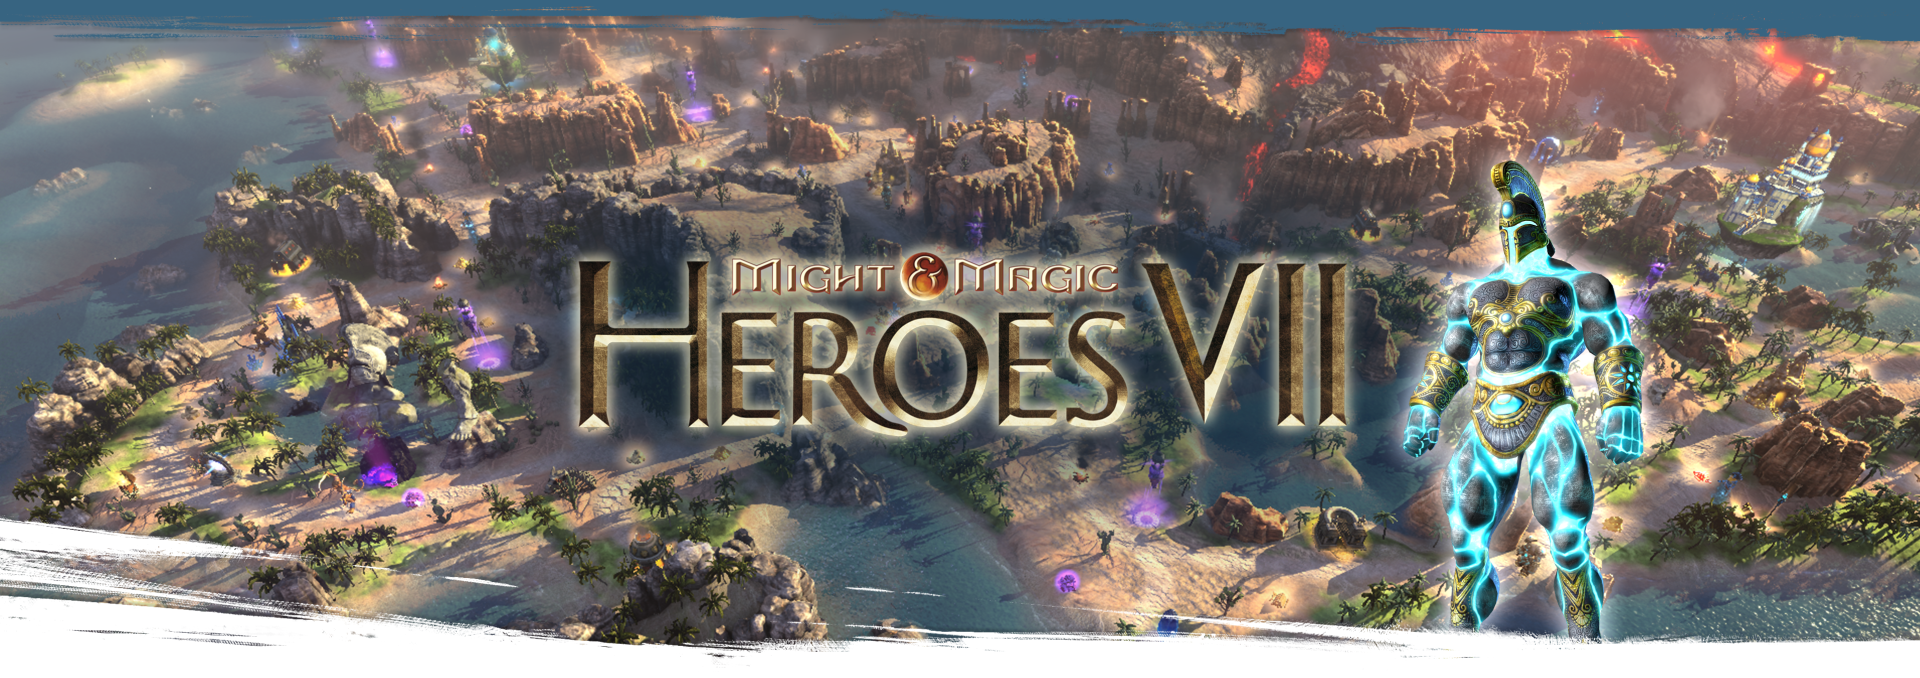 Might and Magic Heroes VII logo in front of a desert landscape.